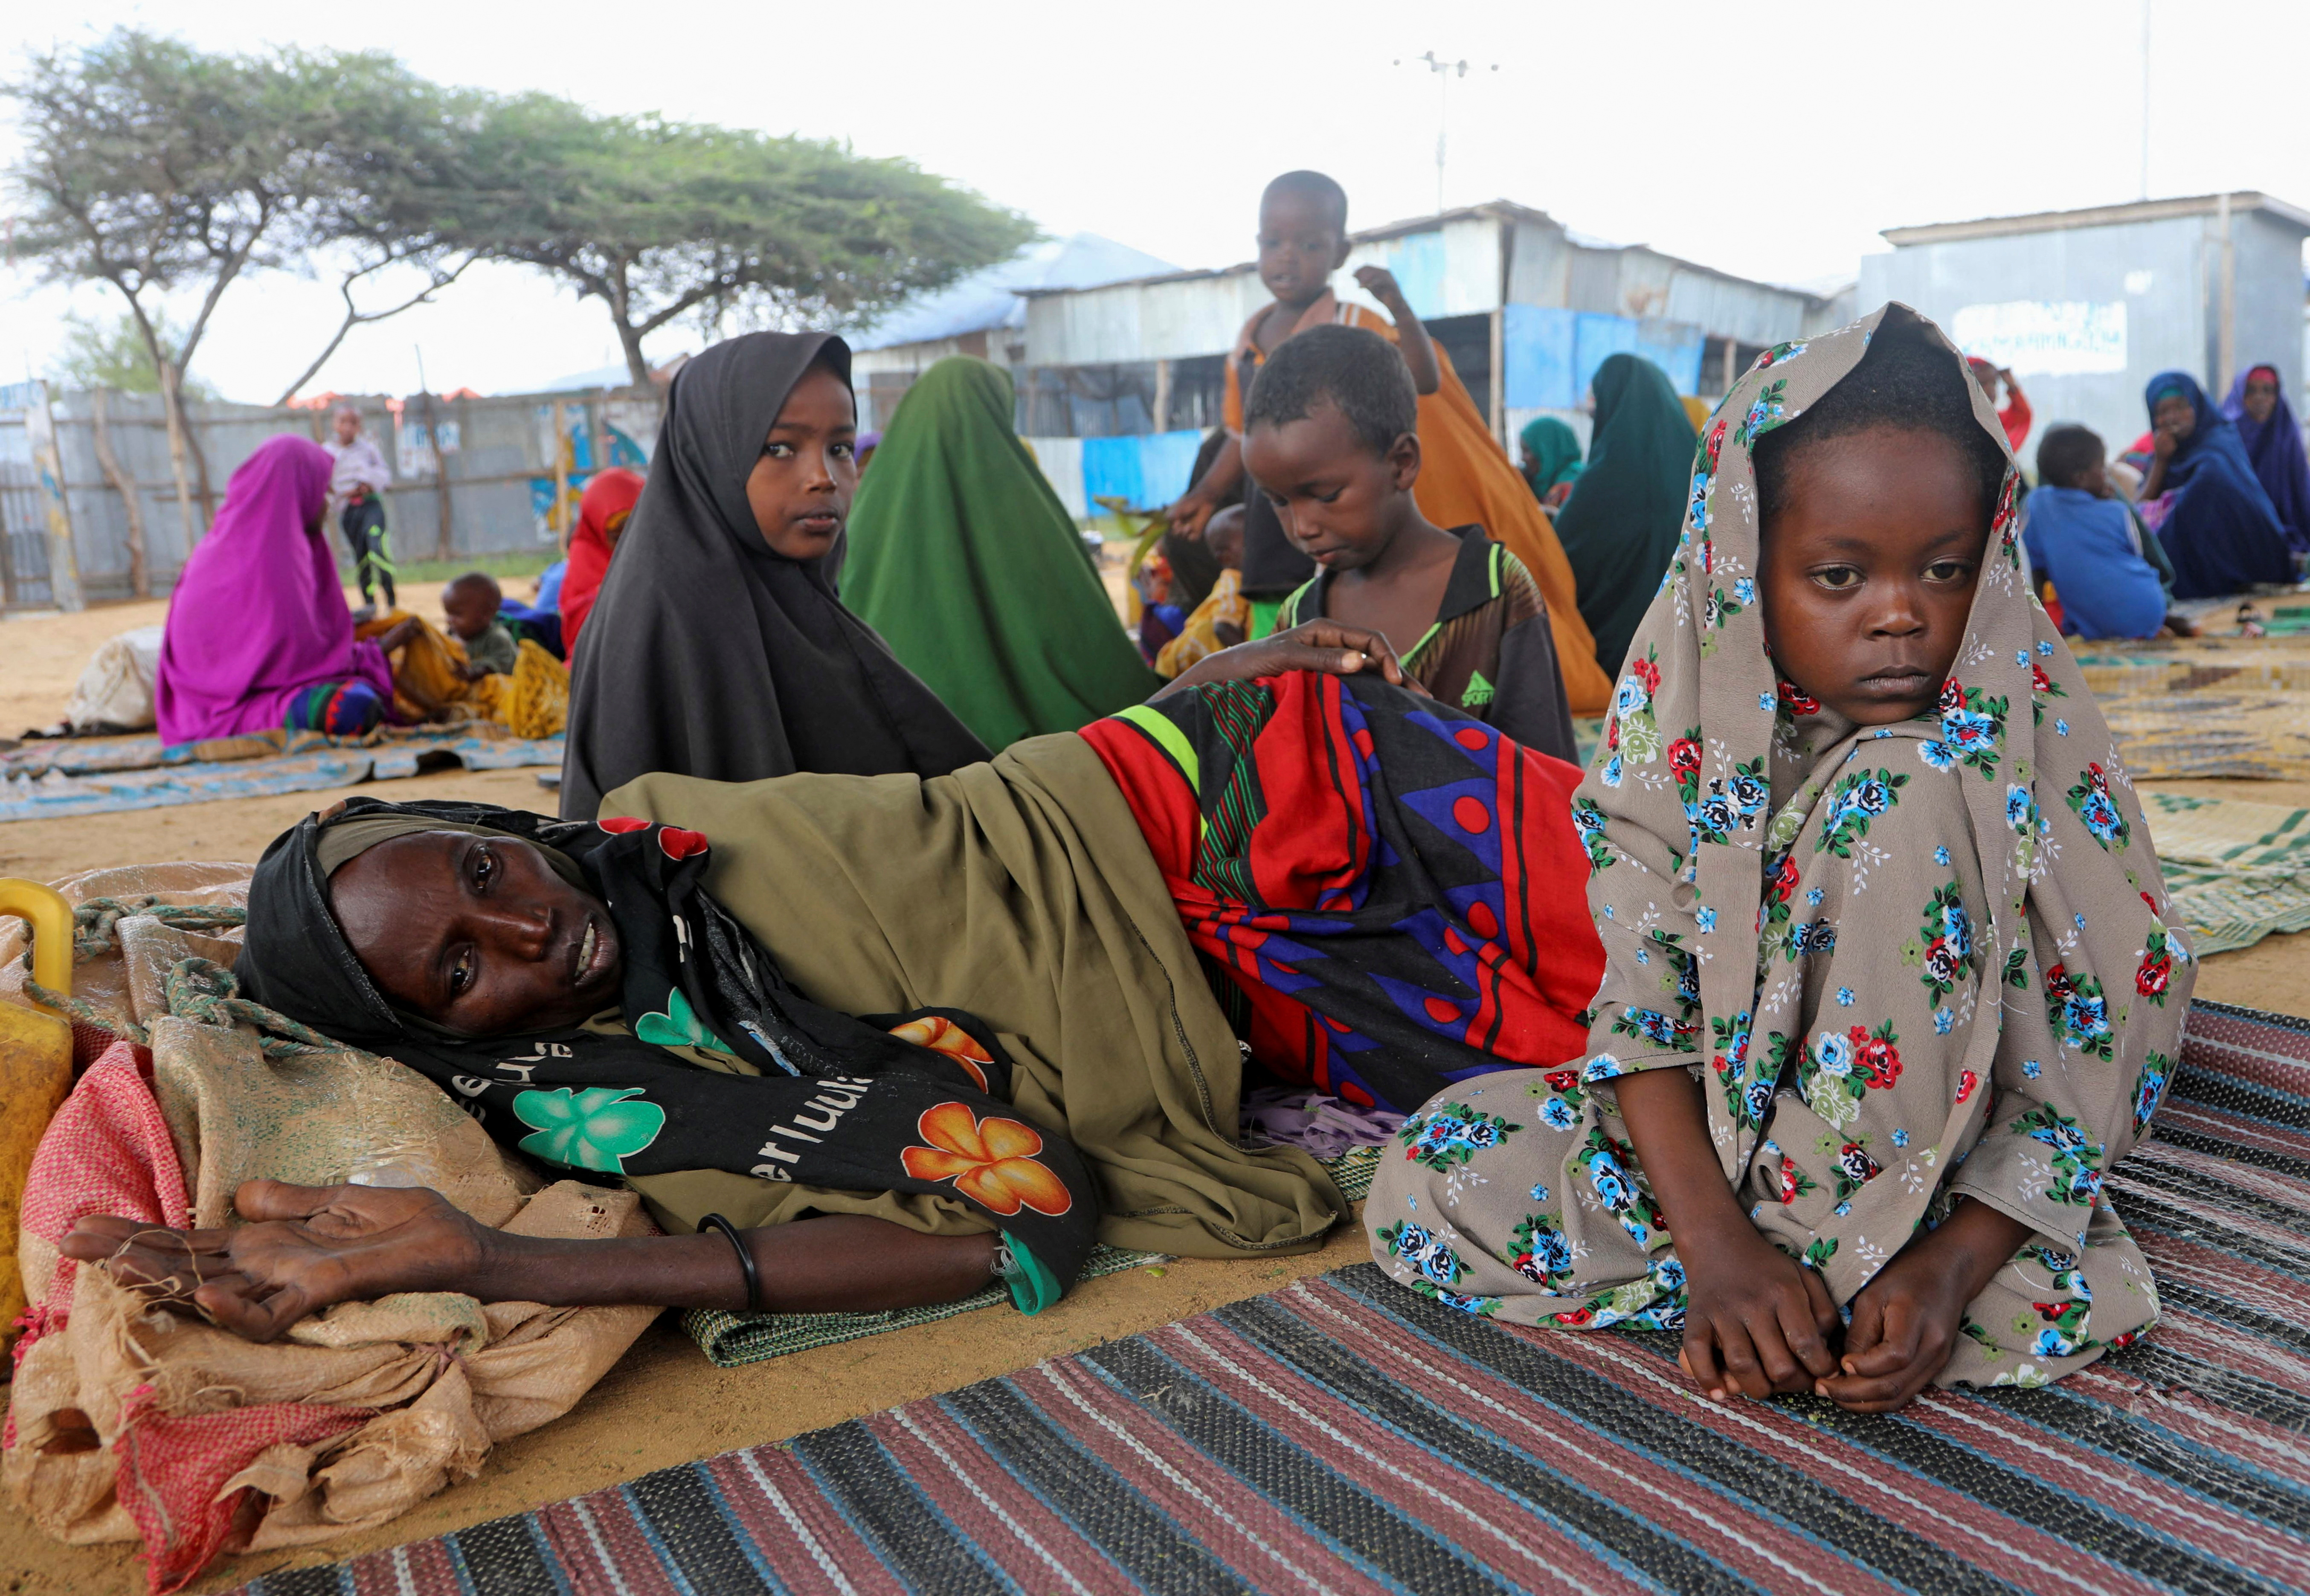 People affected by the worsening drought due to failed rain seasons, look on, at the Alla Futo camp for internally displaced people, in the outskirts of Mogadishu